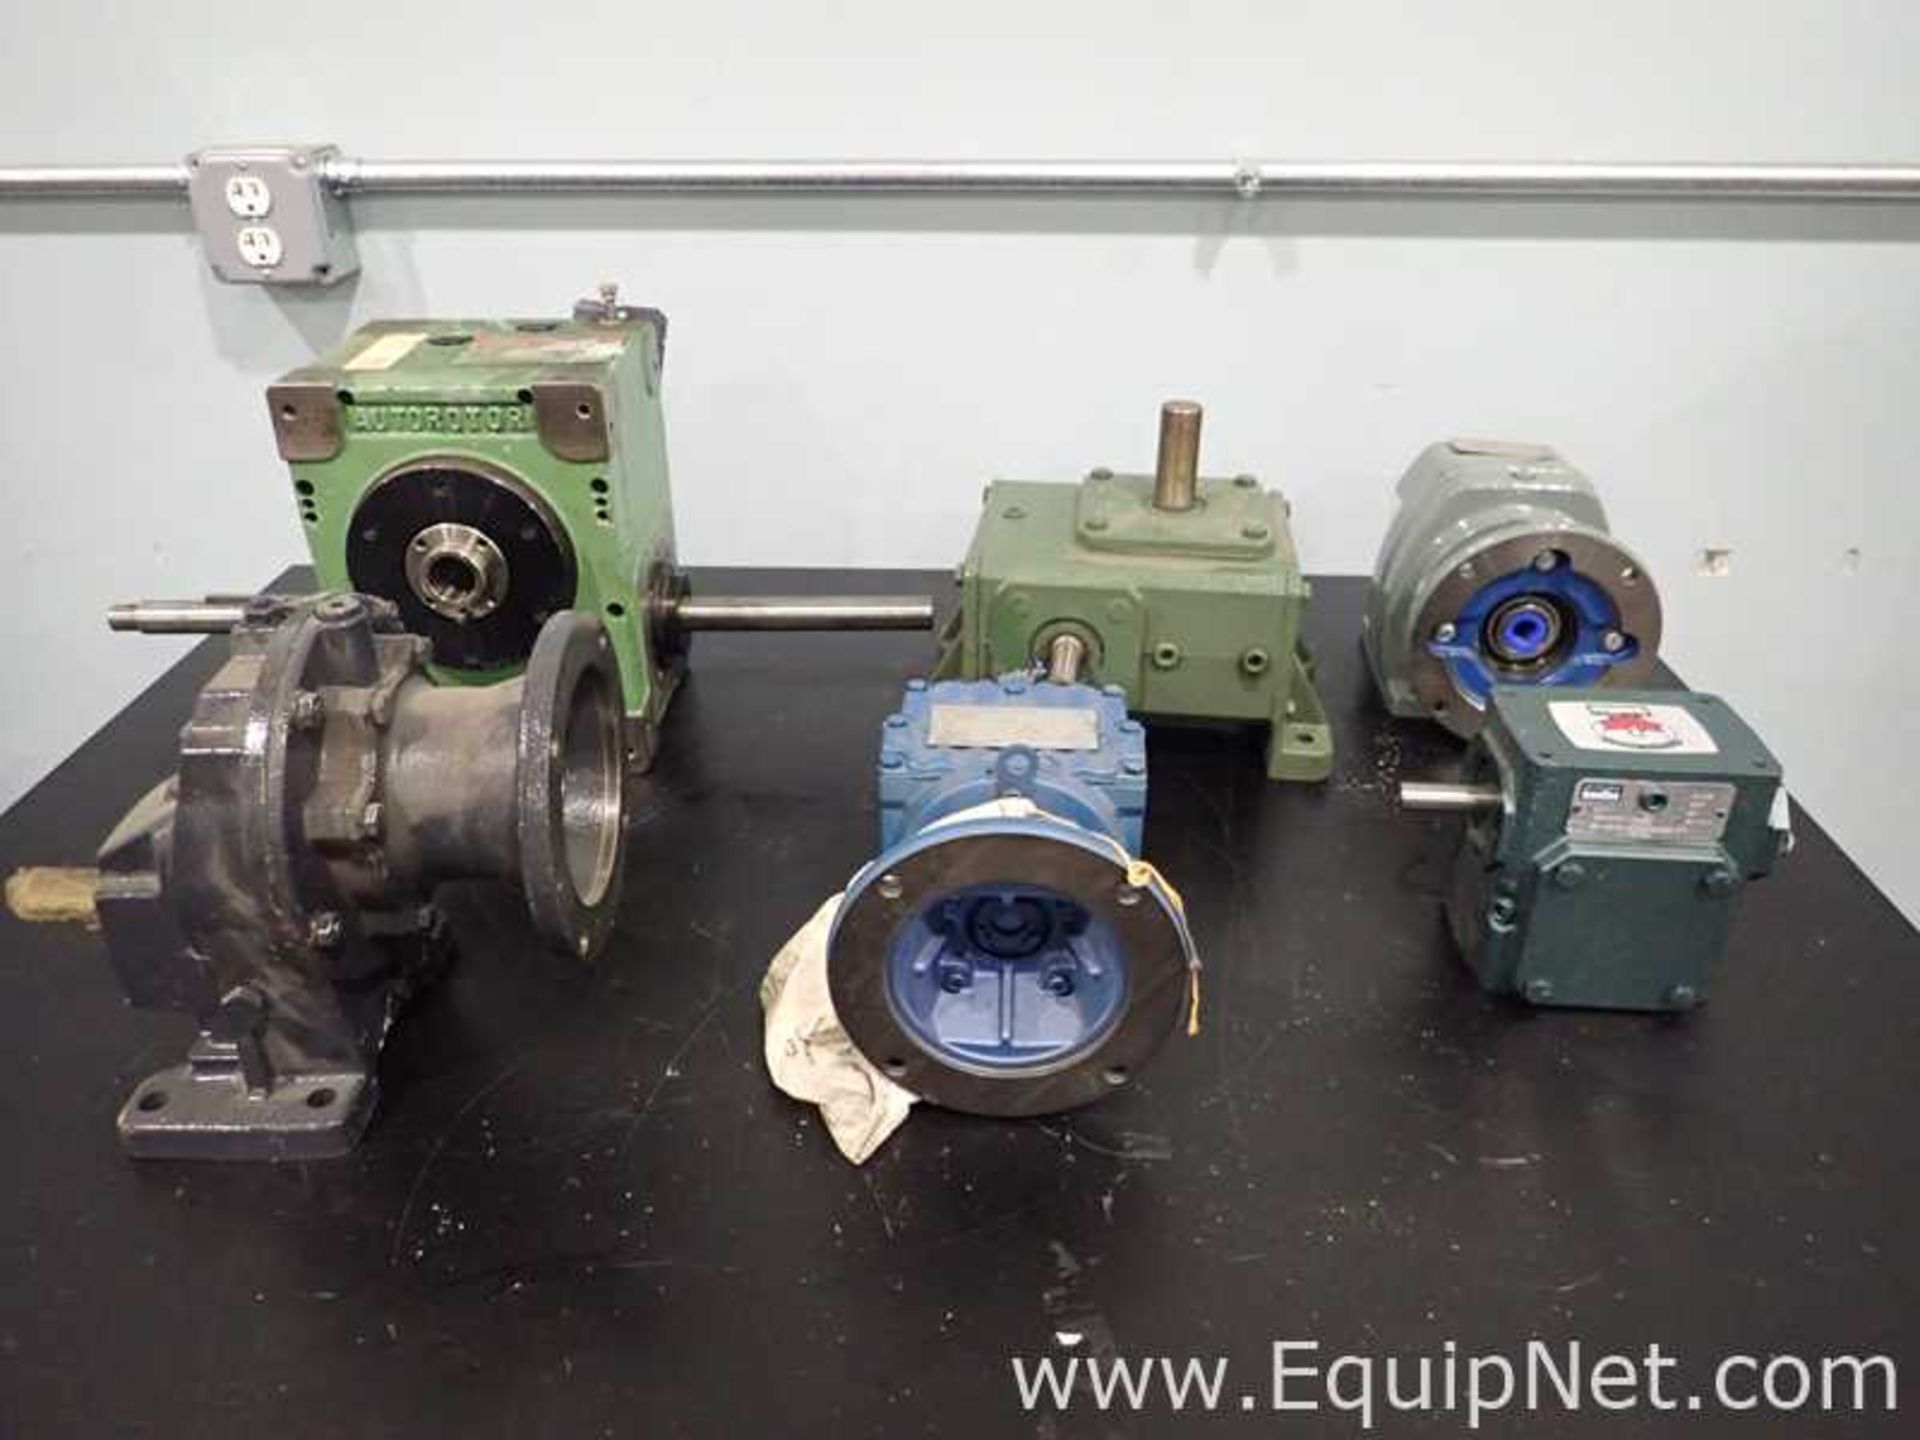 EQUIPNET LISTING #793447; REMOVAL COST: $25; DESCRIPTION: Lot of 6 Various Gear BoxesLot